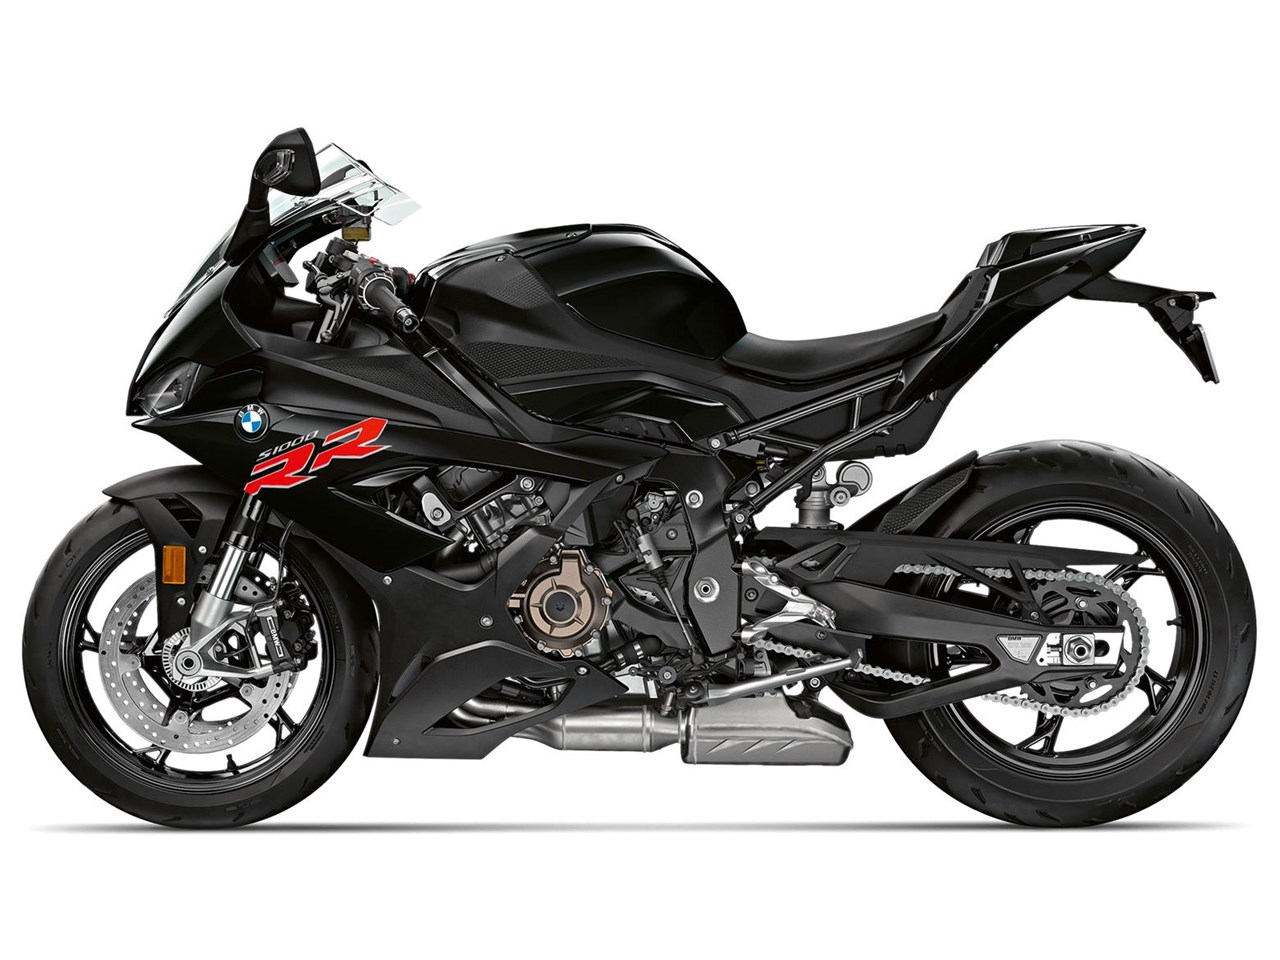 https://mcn-images.bauersecure.com/wp-images/4705/1440x960/bmw-s1000rr-black-03.jpg?mode=max&quality=90&scale=down